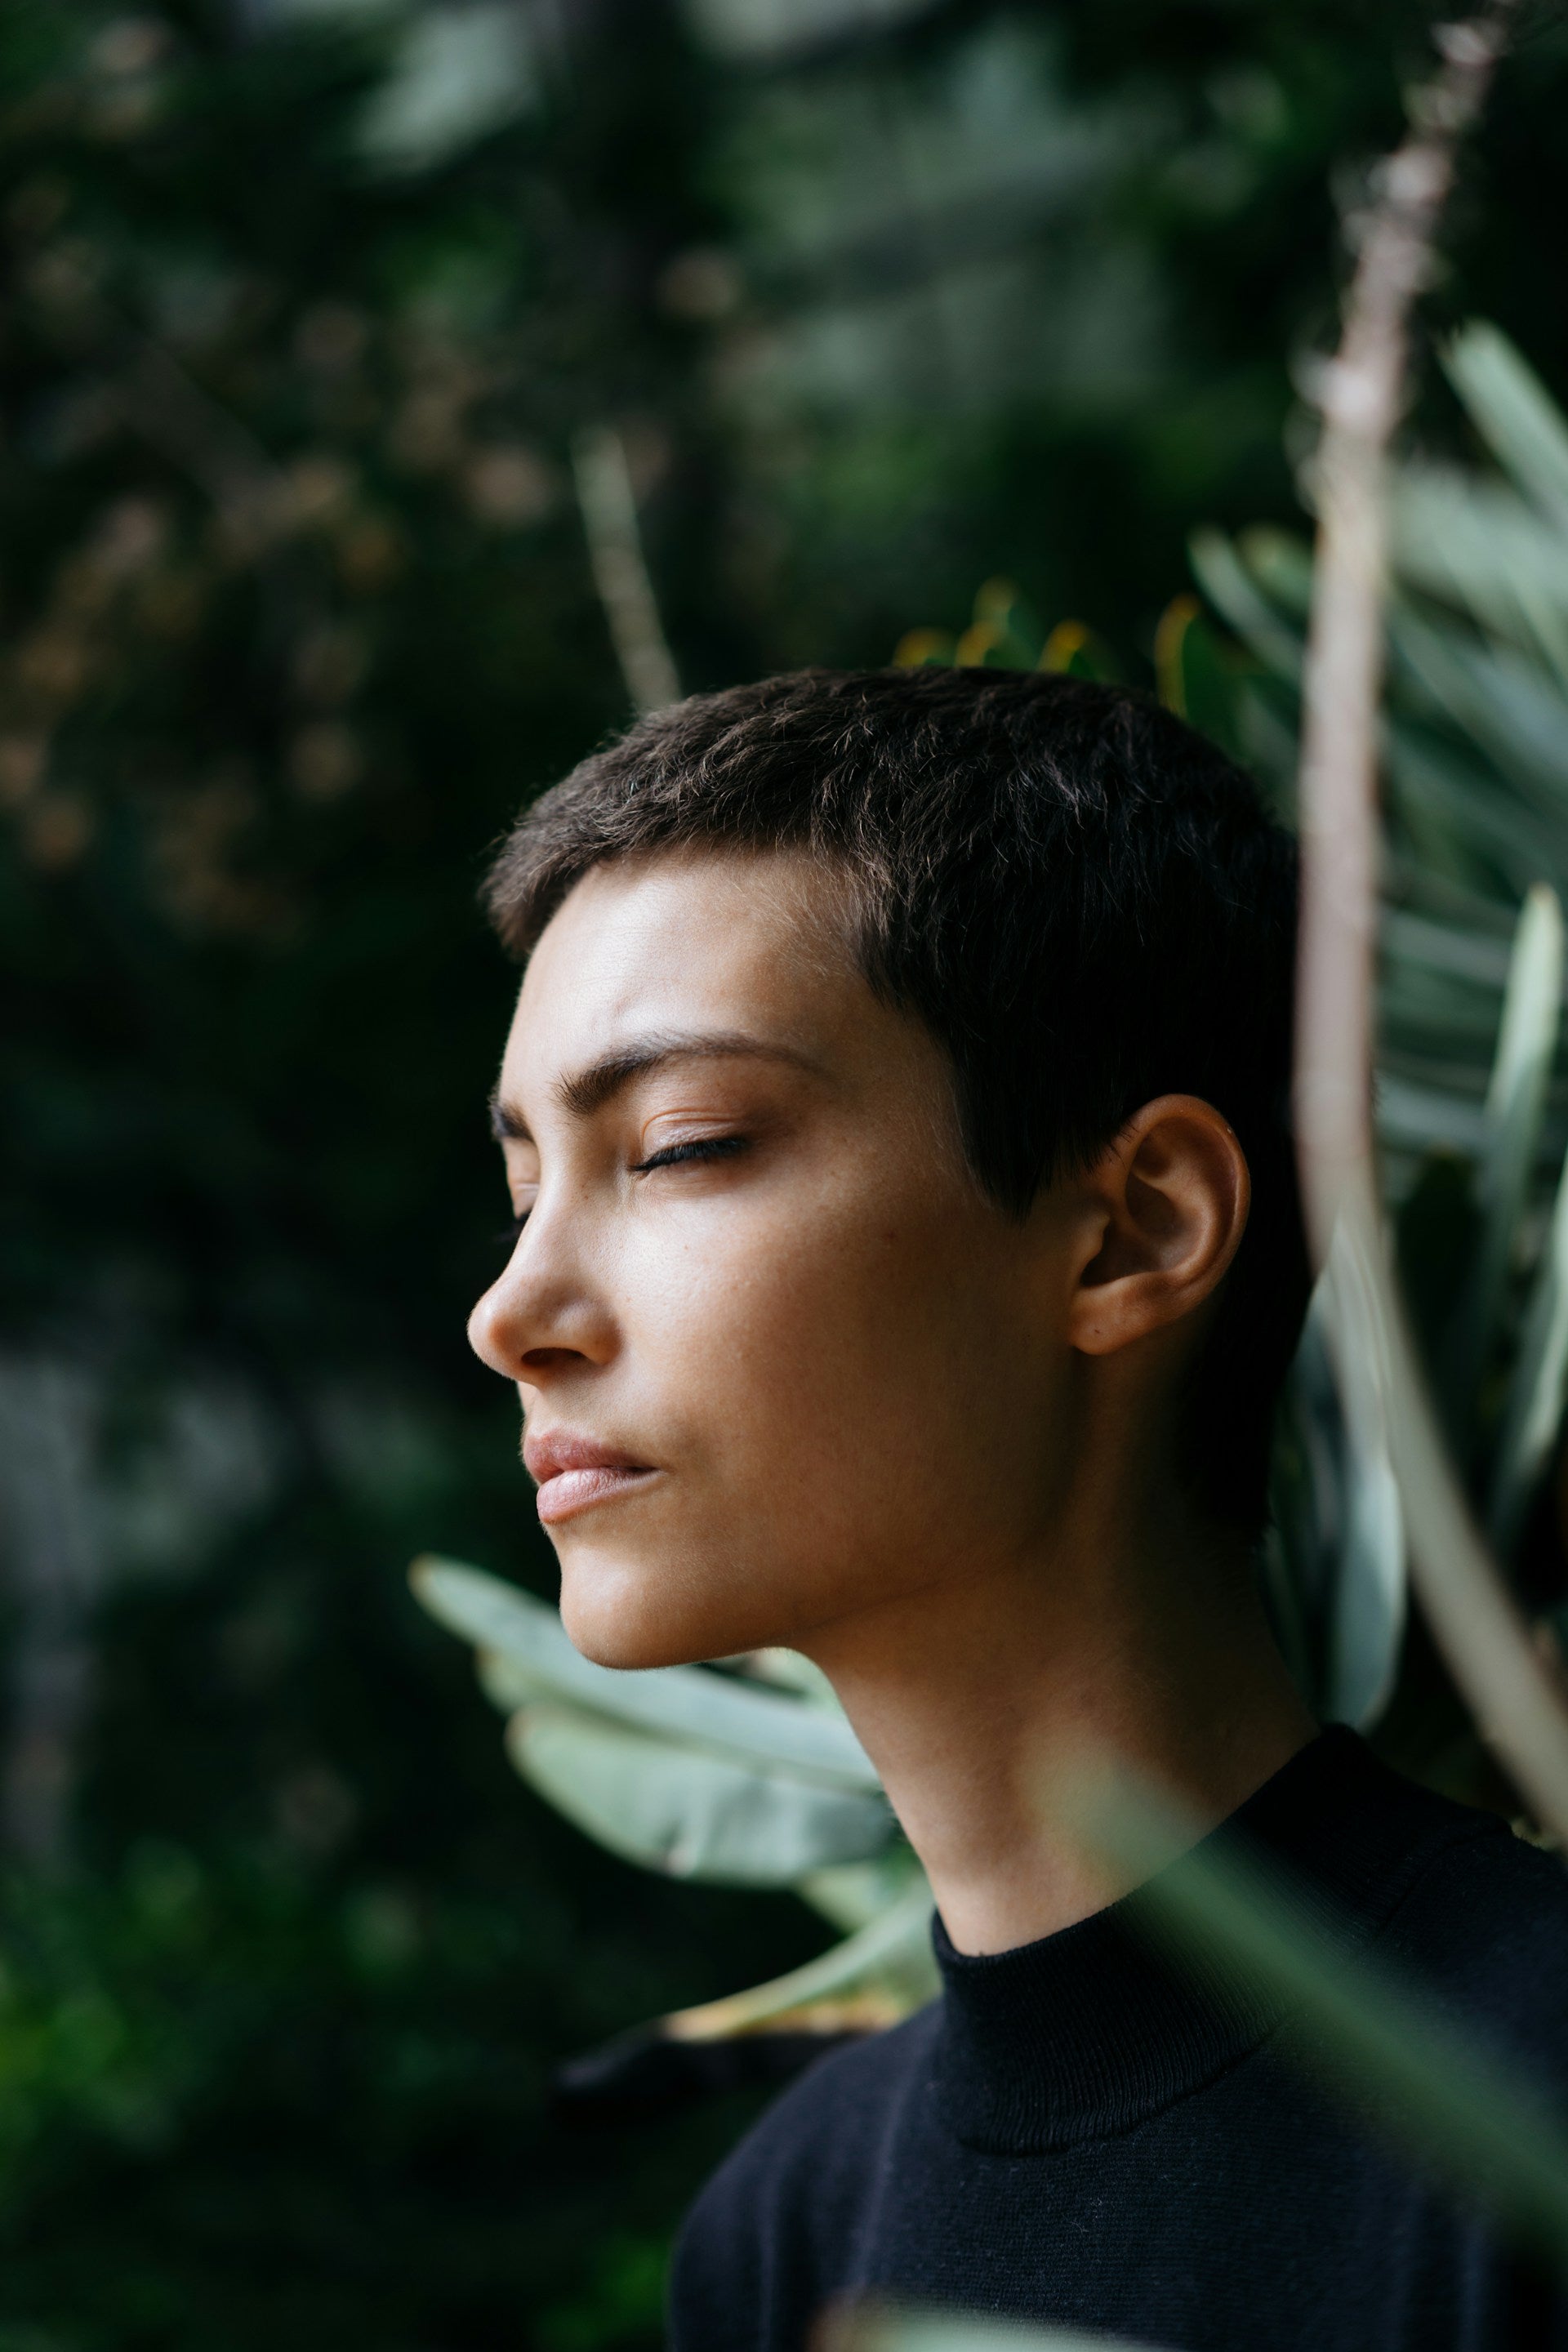 A short haired person closing their eyes in meditation with greenery in the background